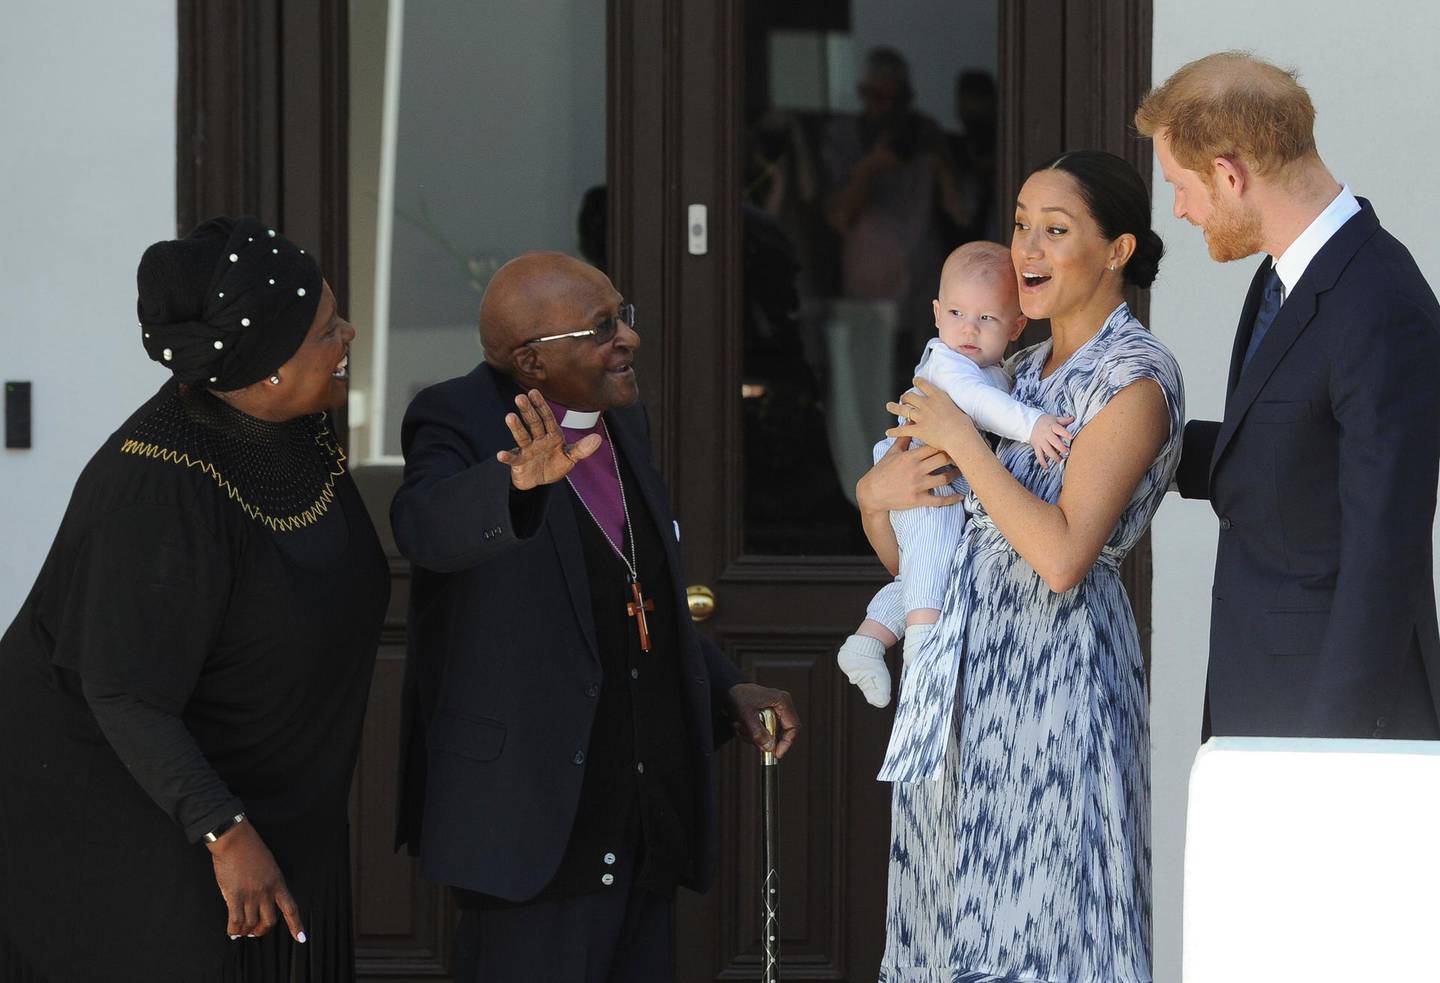 Britain's Prince Harry and Meghan, Duchess of Sussex, holding their son Archie, meets with Anglican Archbishop Emeritus, Desmond Tutu, and his wife Leah in Cape Town, South Africa, Wednesday, Sept. 25, 2019. The royal couple are on the third day of their African tour. (Henk Kruger/African News Agency via AP, Pool)